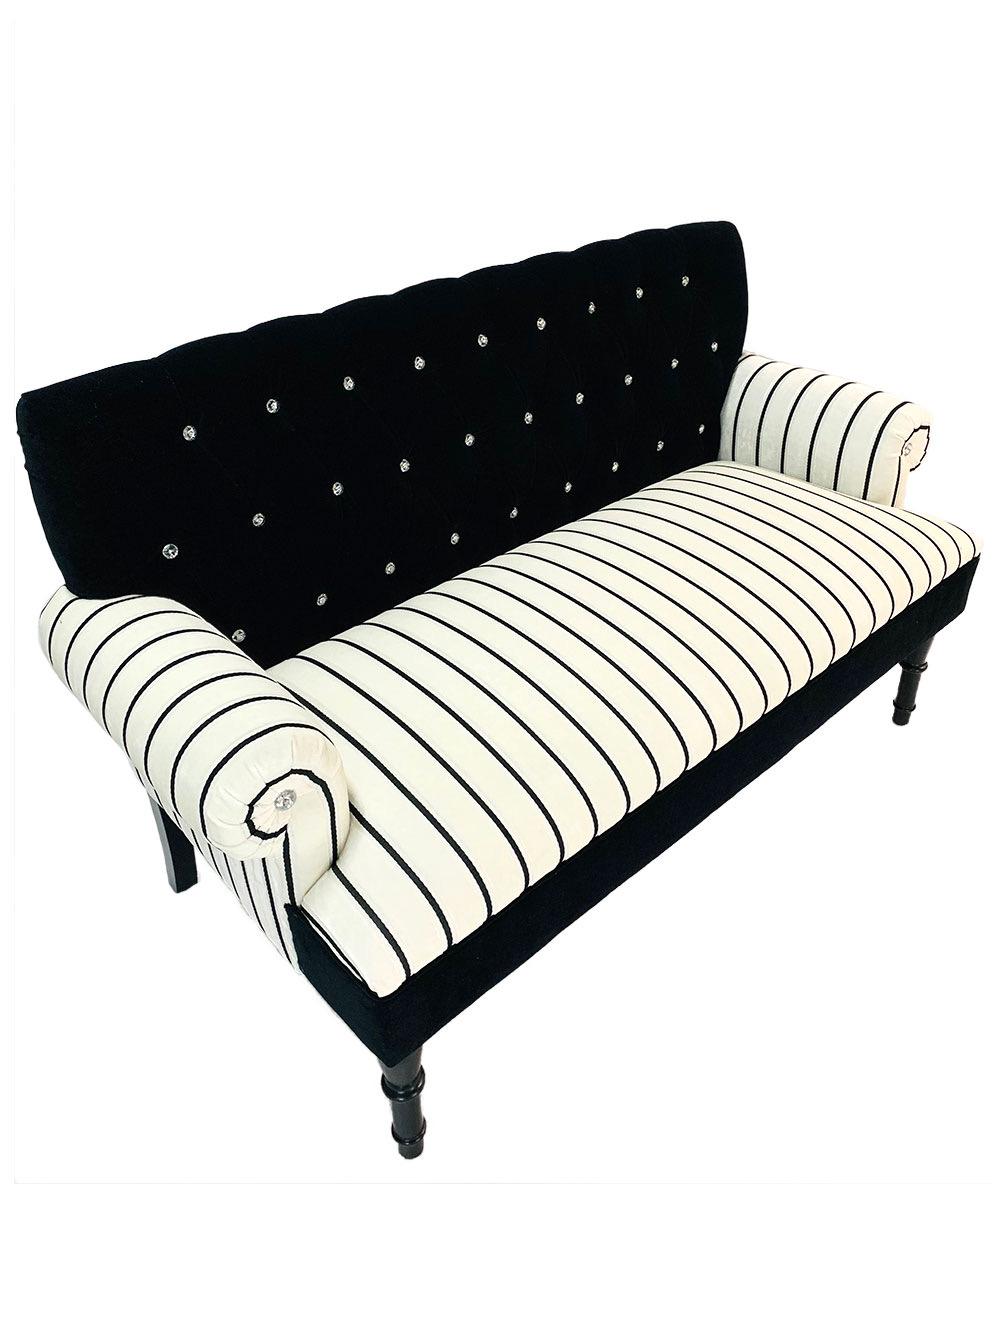 20th century traditional Chesterfield style settee with rolled arms and crystal button tufts on a black velvet back contrasted with elegant Stroheim black satin and white cut velvet stripe fabric.